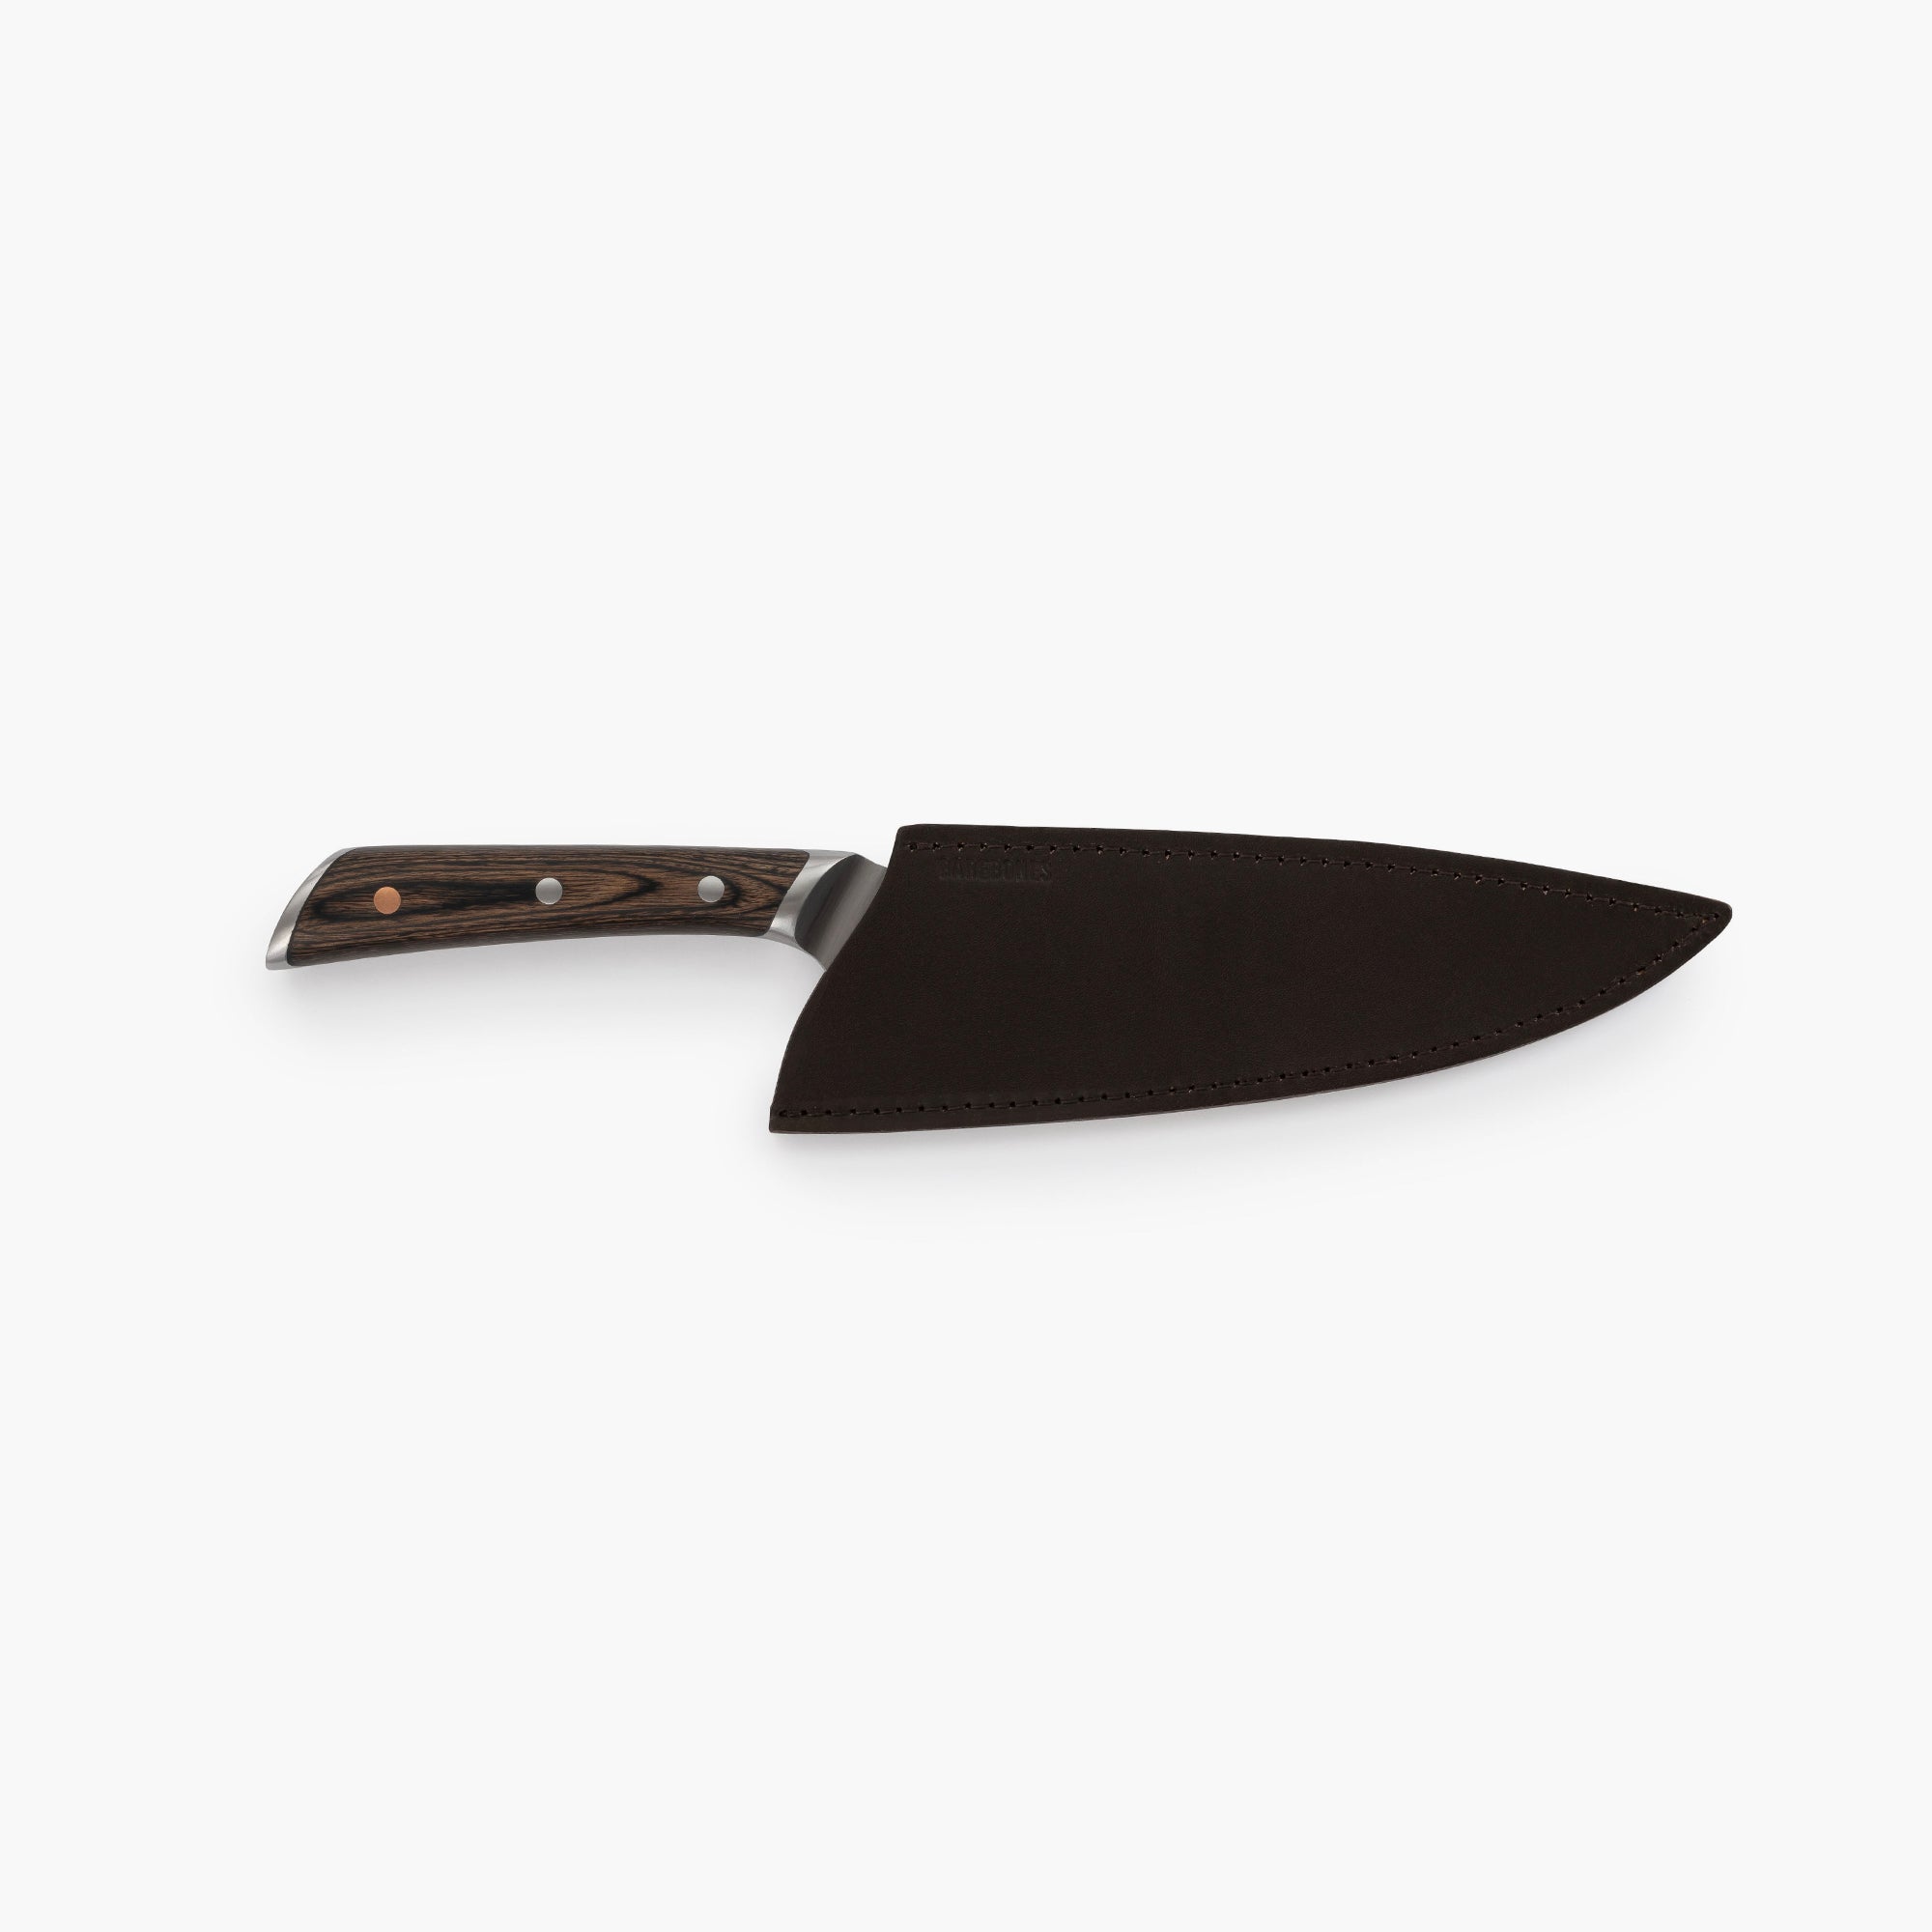 8 Inch Chef Knife with a Red Granite Handle, a Garnet Colored Cubic  Zirconia Stone at the Back of the Knife and Brass and Stainless Steel  Decorative Rings : Craftstone Knives